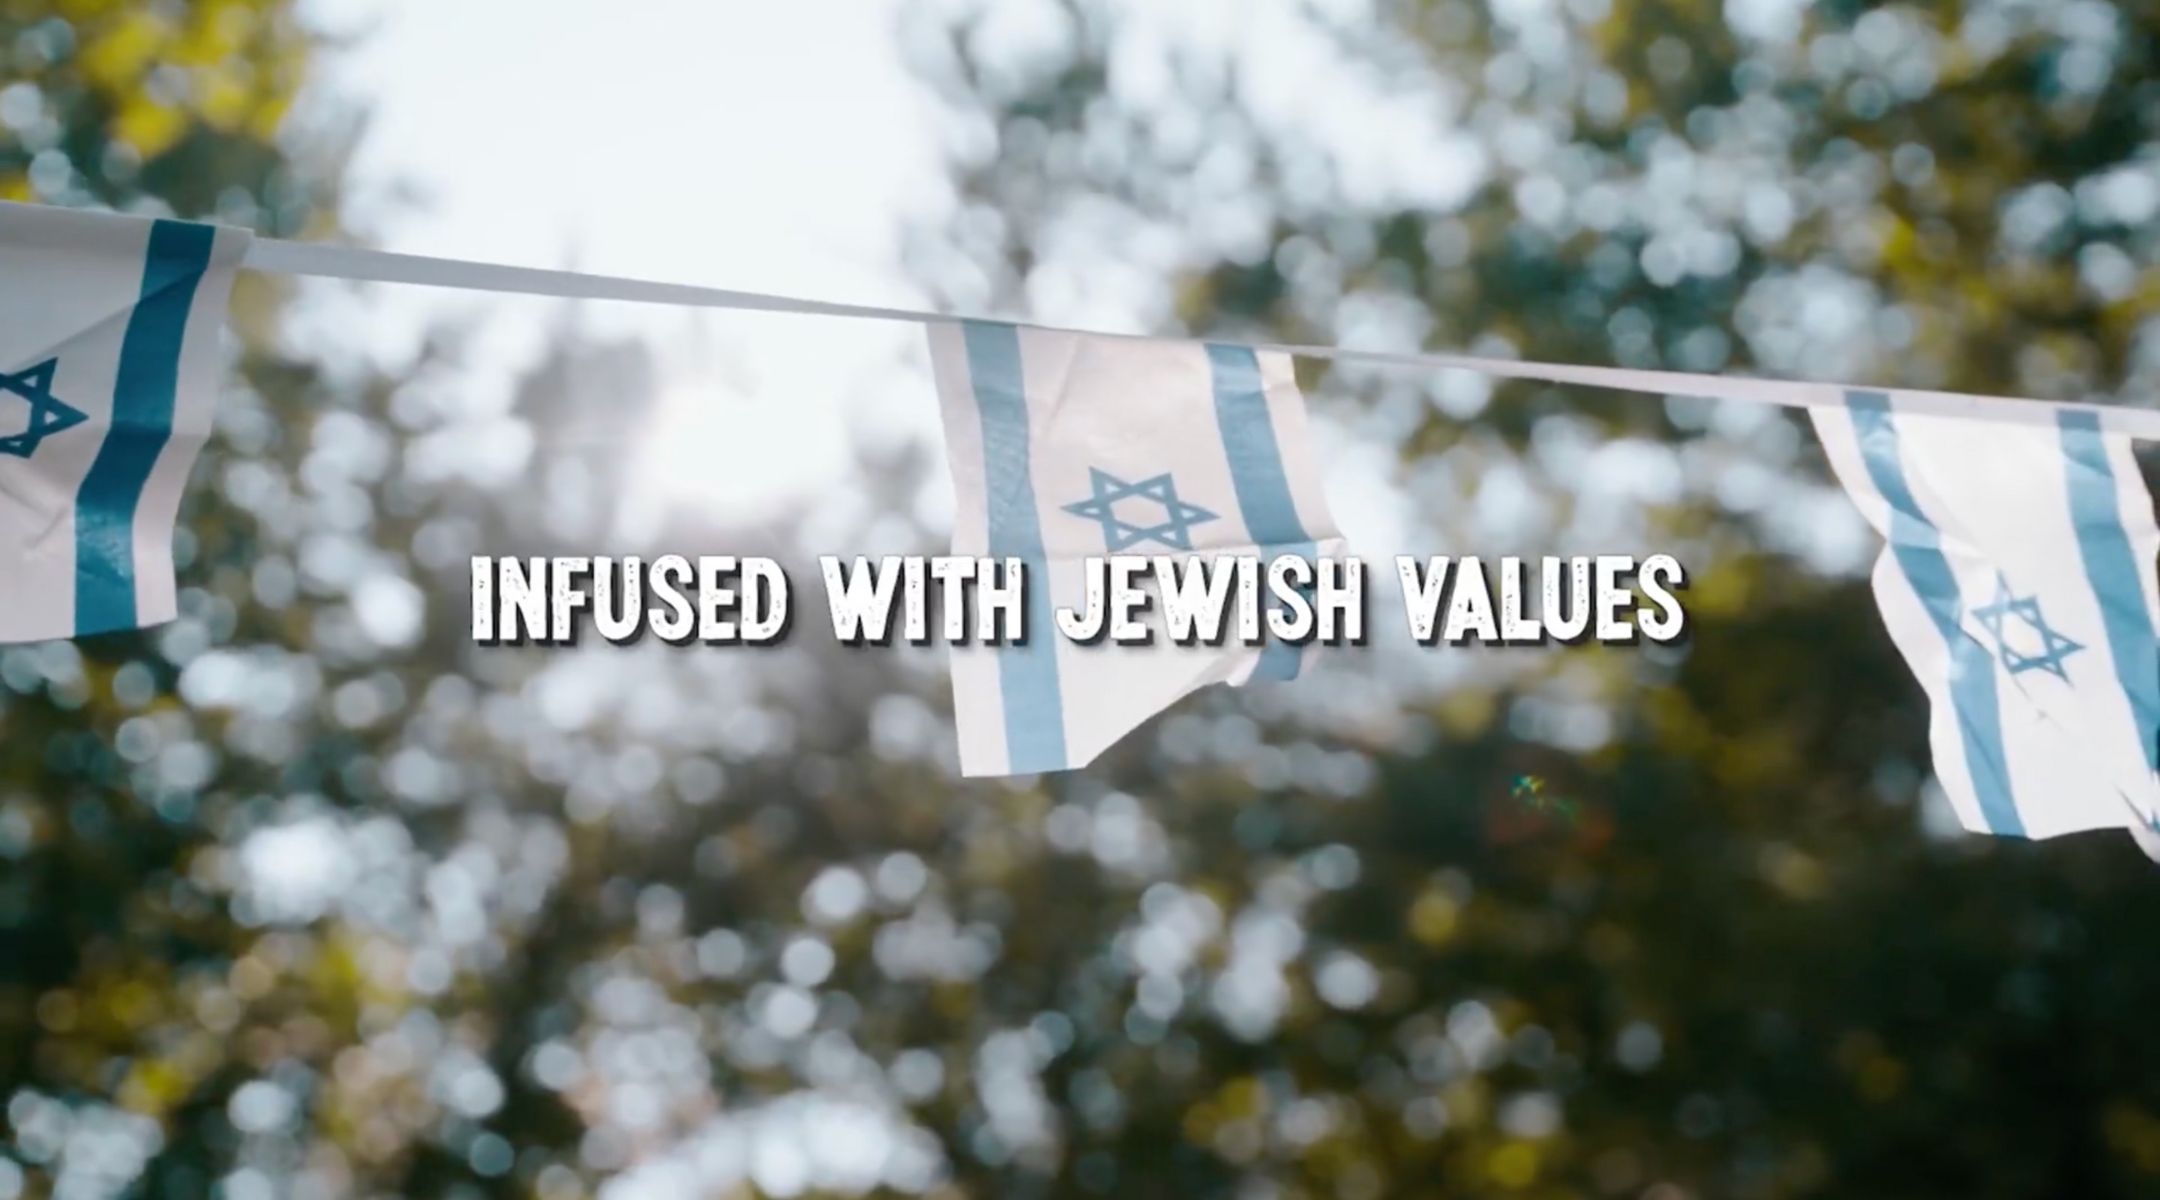 Camp Twelve Trails features Israeli flags in its promotional video. (Screenshot)